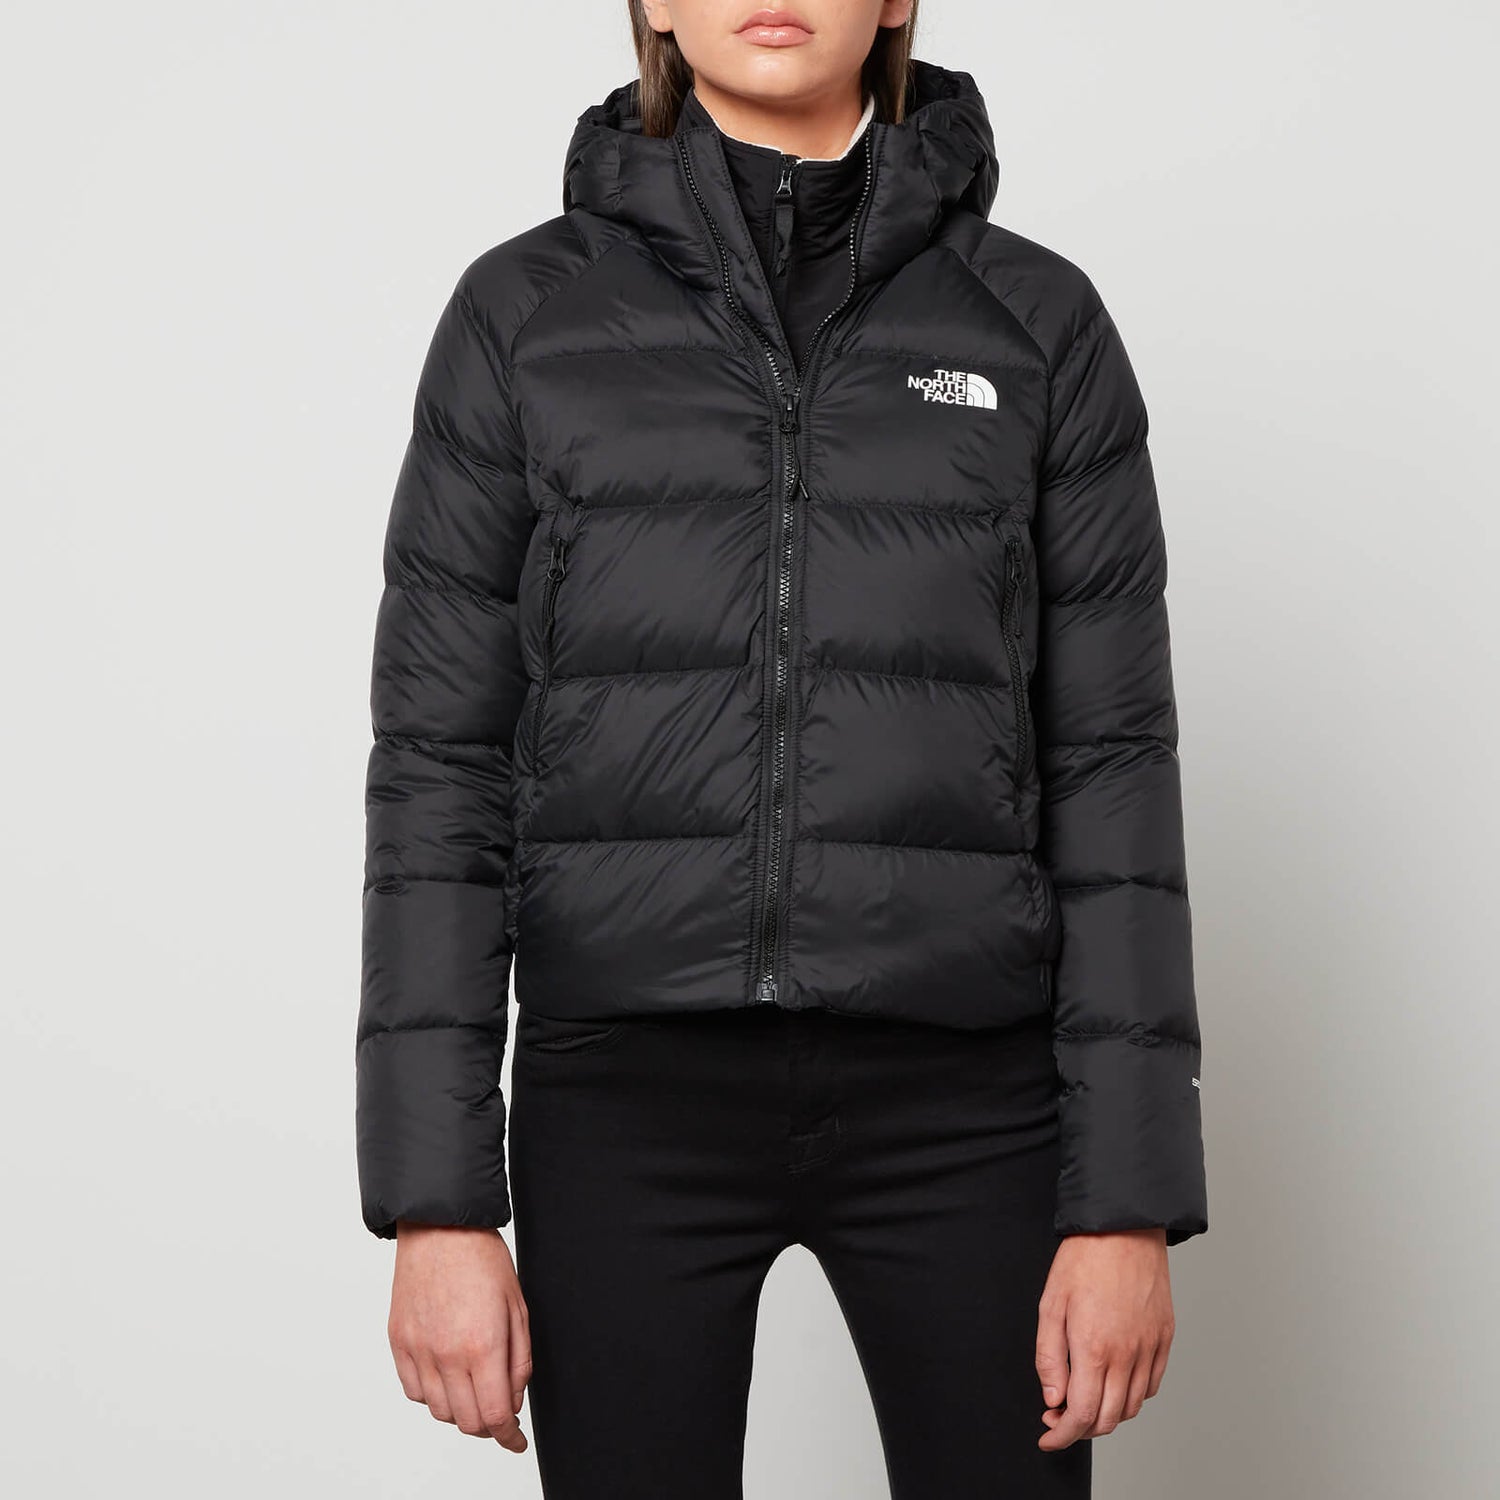 The North Face Women's Hyalite Down Hoodie Jacket - TNF Black